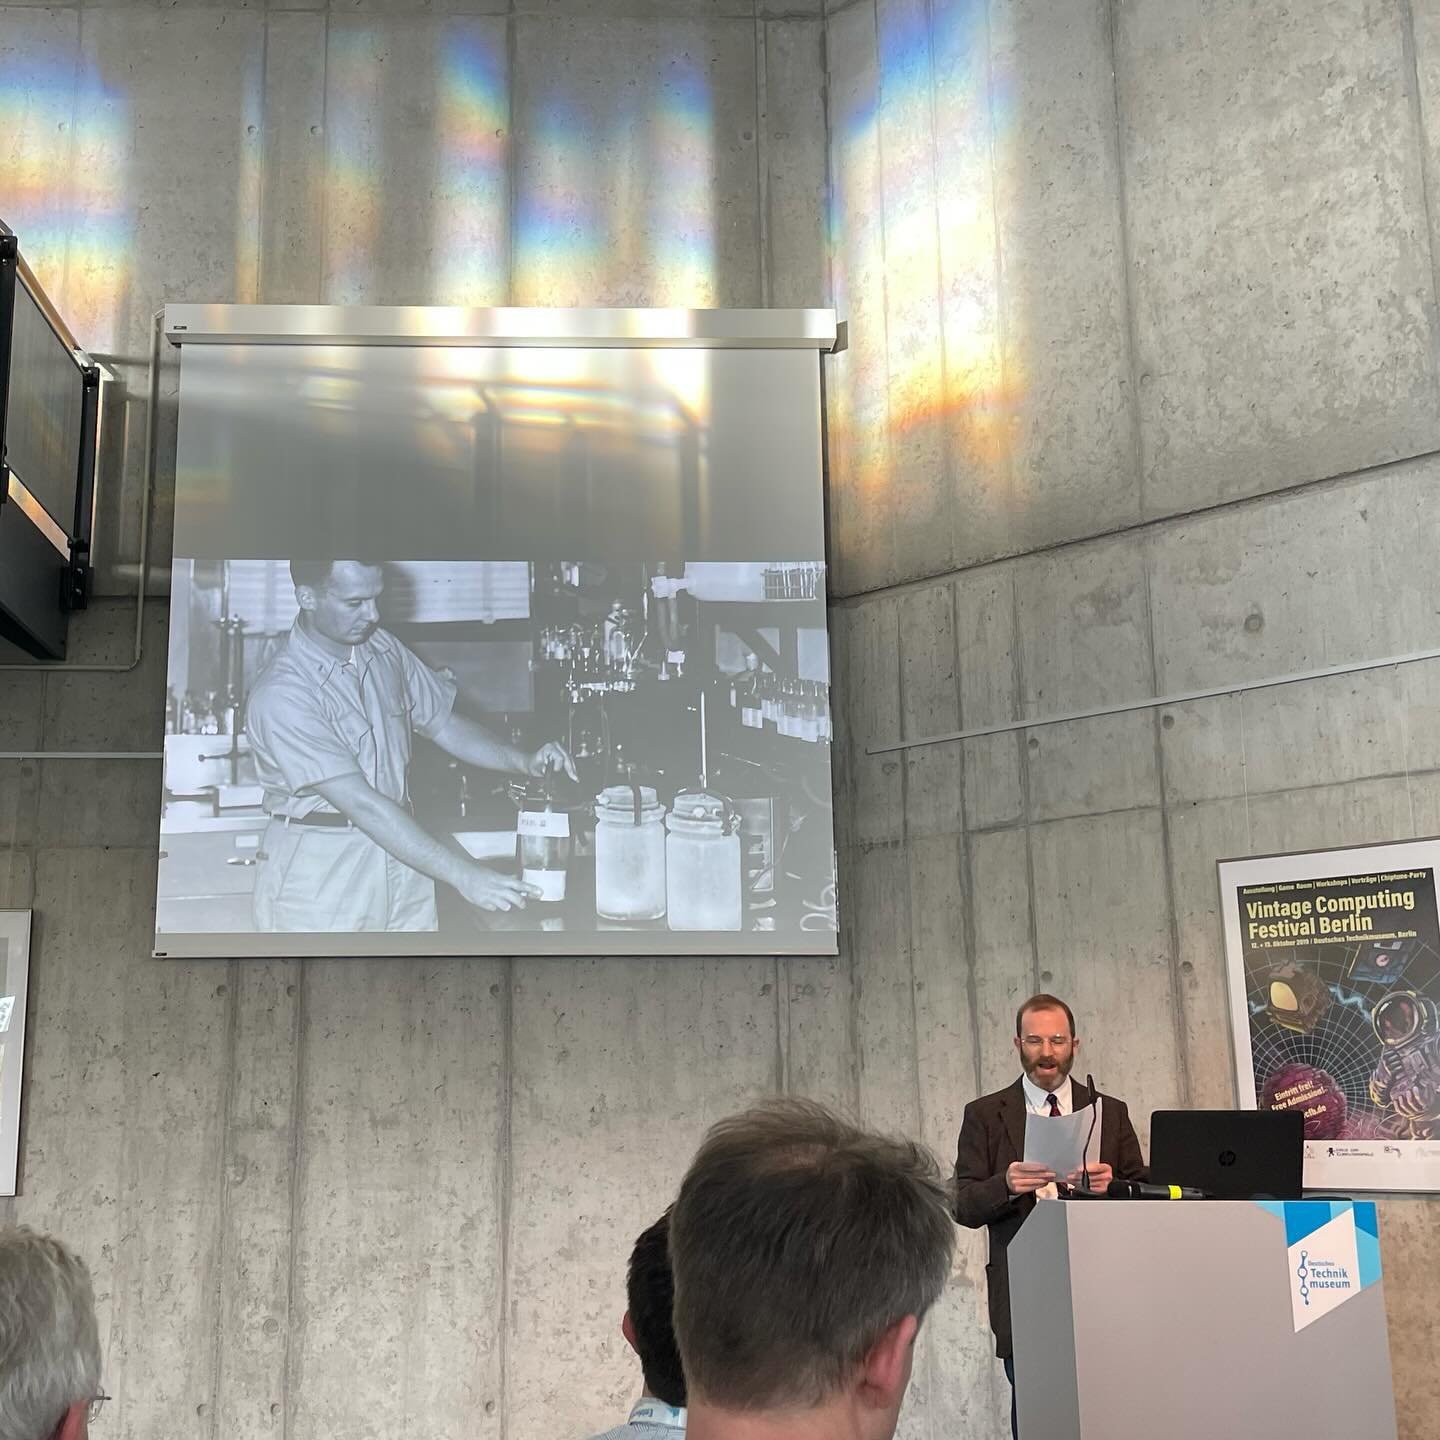 Had a great time speaking about Mars jars and astrobiology at the Gesellschaft f&uuml;r Technikgeschichte (GTG) meeting at the Deutsches Technikmuseum. The sunlight was projecting these cool spectrums over my slides!